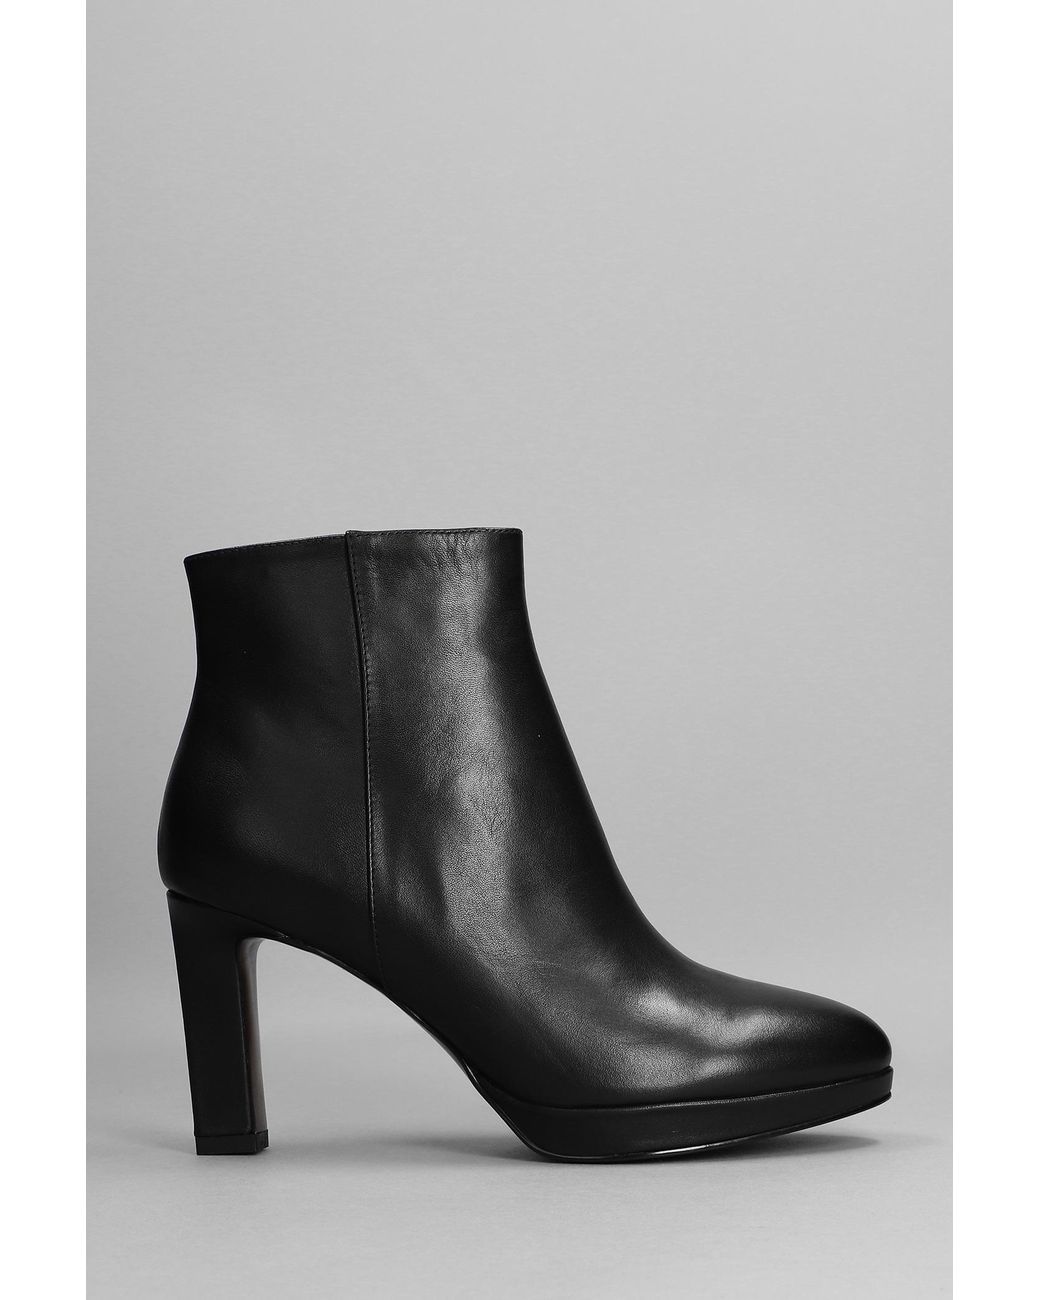 Bibi Lou High Heels Ankle Boots In Black Leather | Lyst